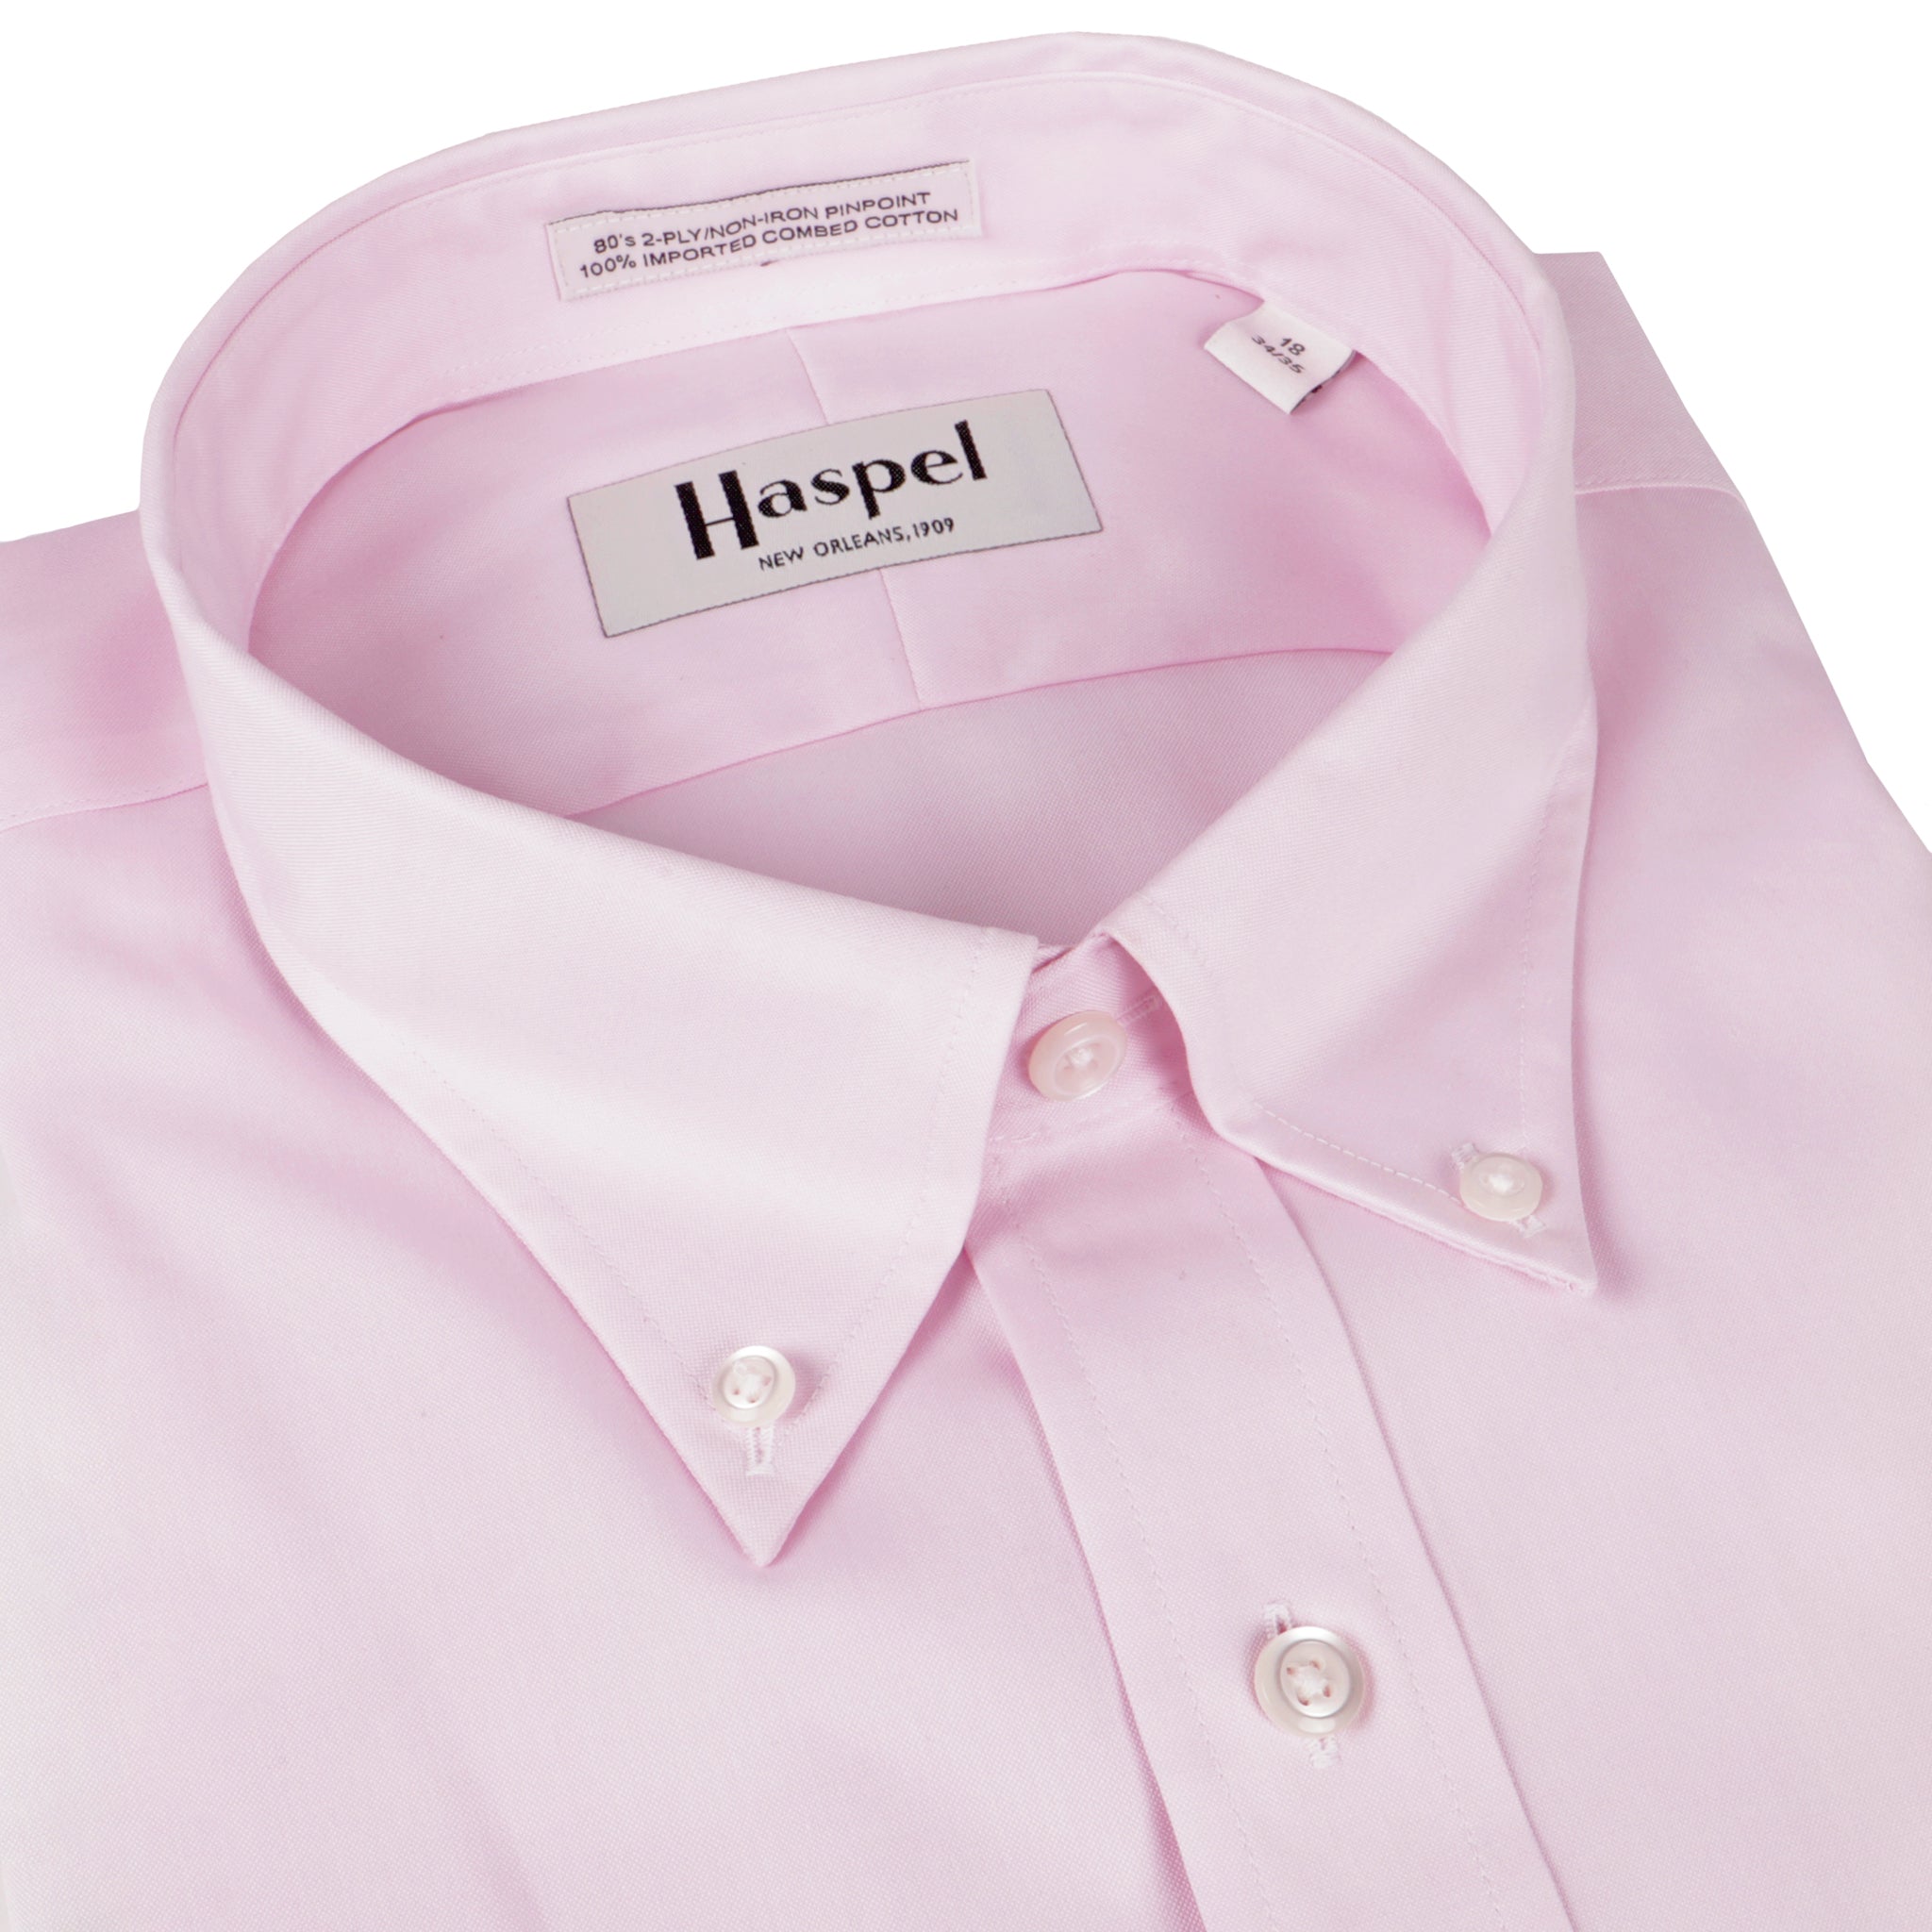 The History of the Oxford shirt: From the british elite to casual